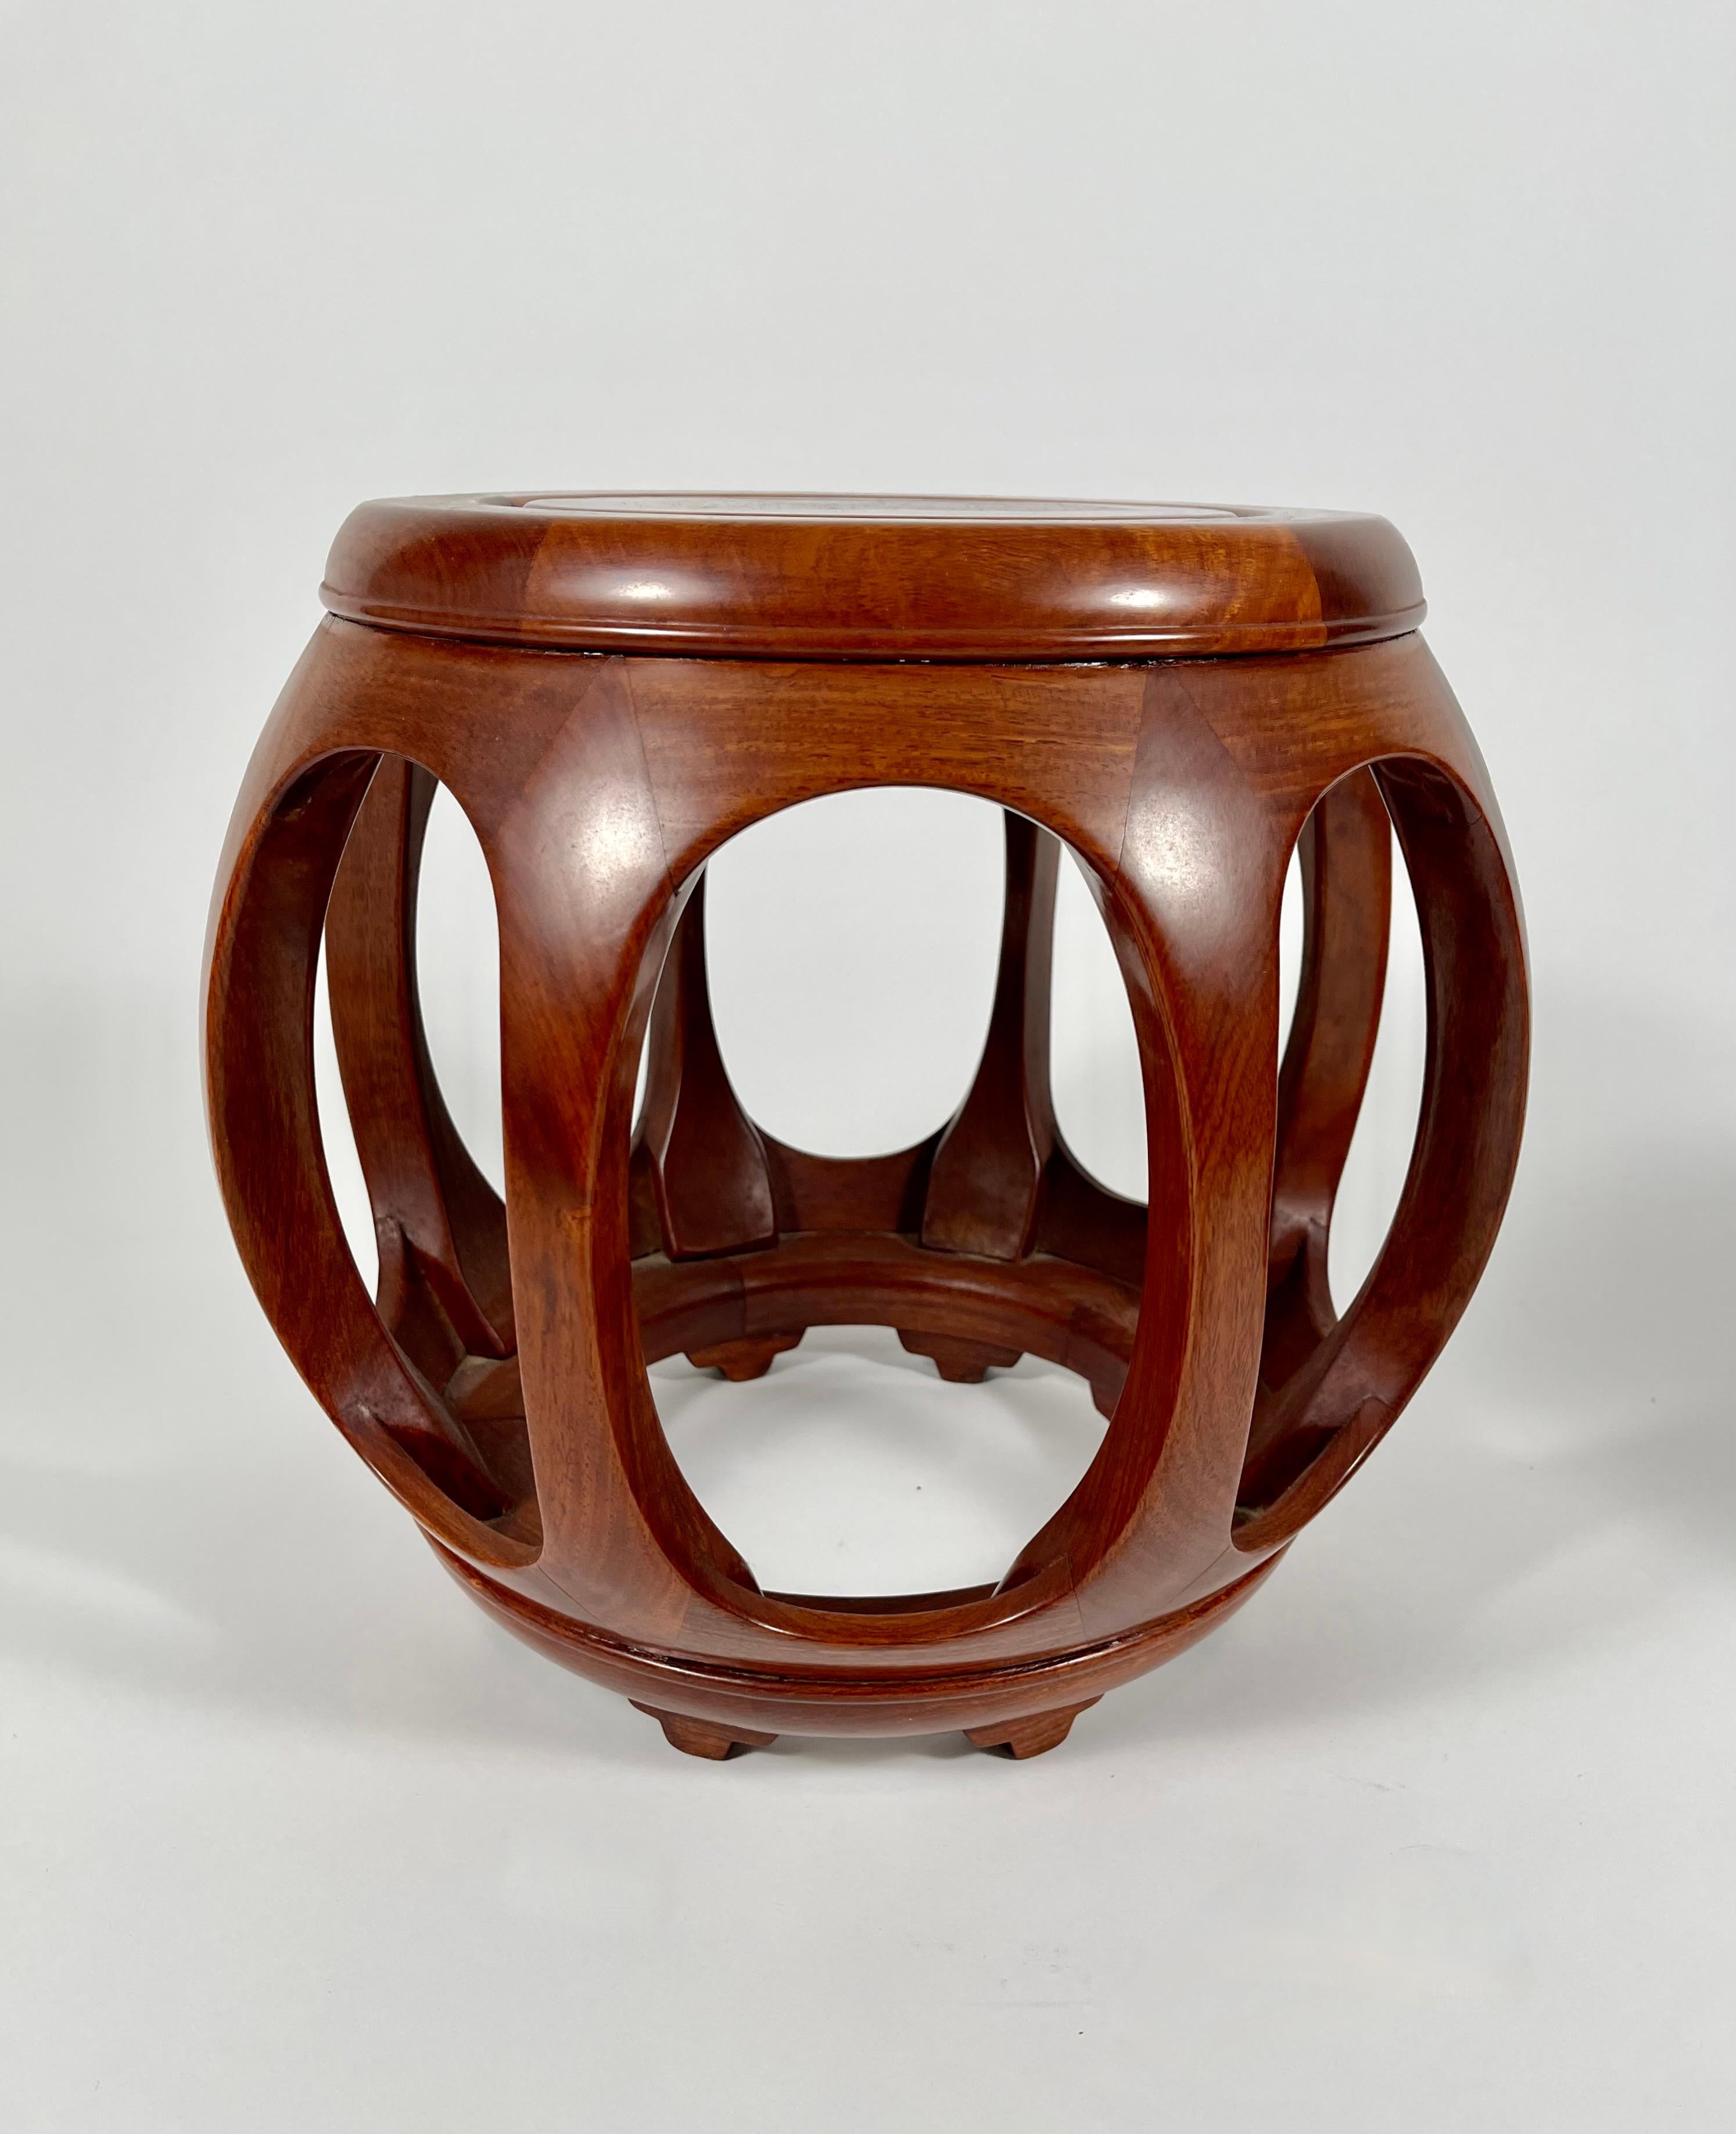 A fine quality pair of Chinese hardwood melon-form stools, ideal as small drinks tables, each of barrel form with inset circular top supported by semi-circular legs raised on a ring-form base with shaped feet. Beautiful rich color and solid